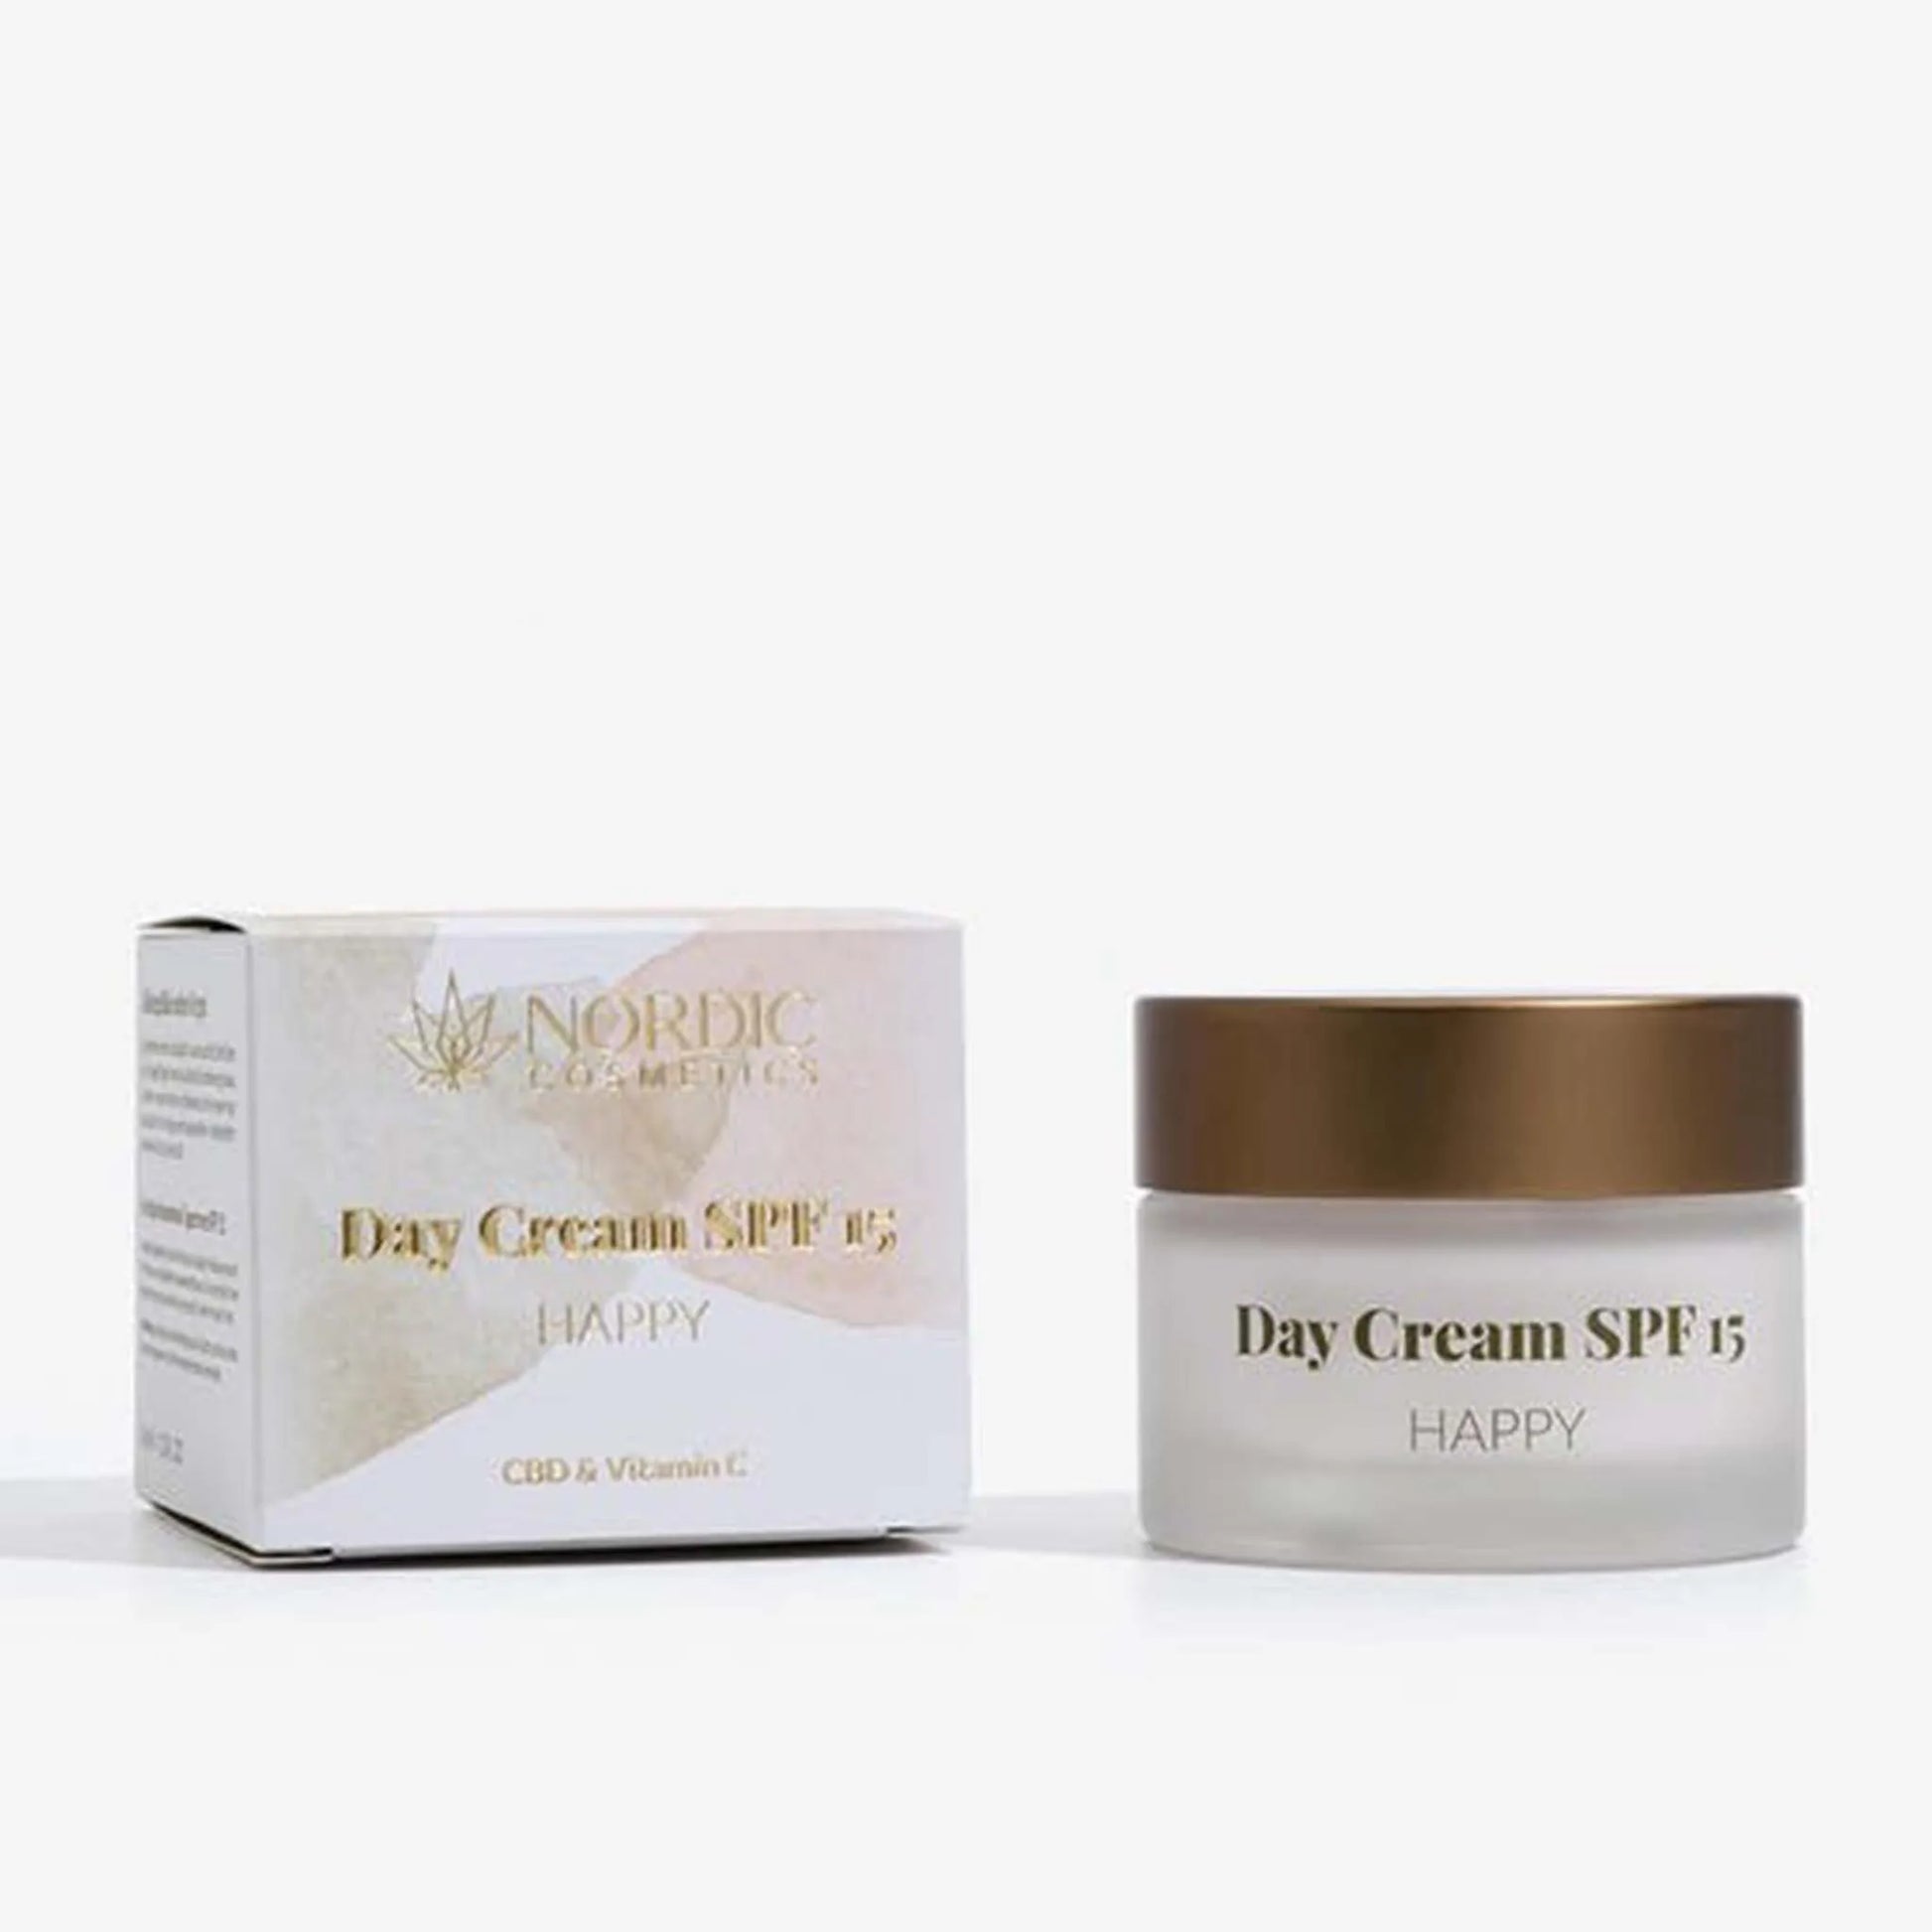 Cream - Packaging and Product